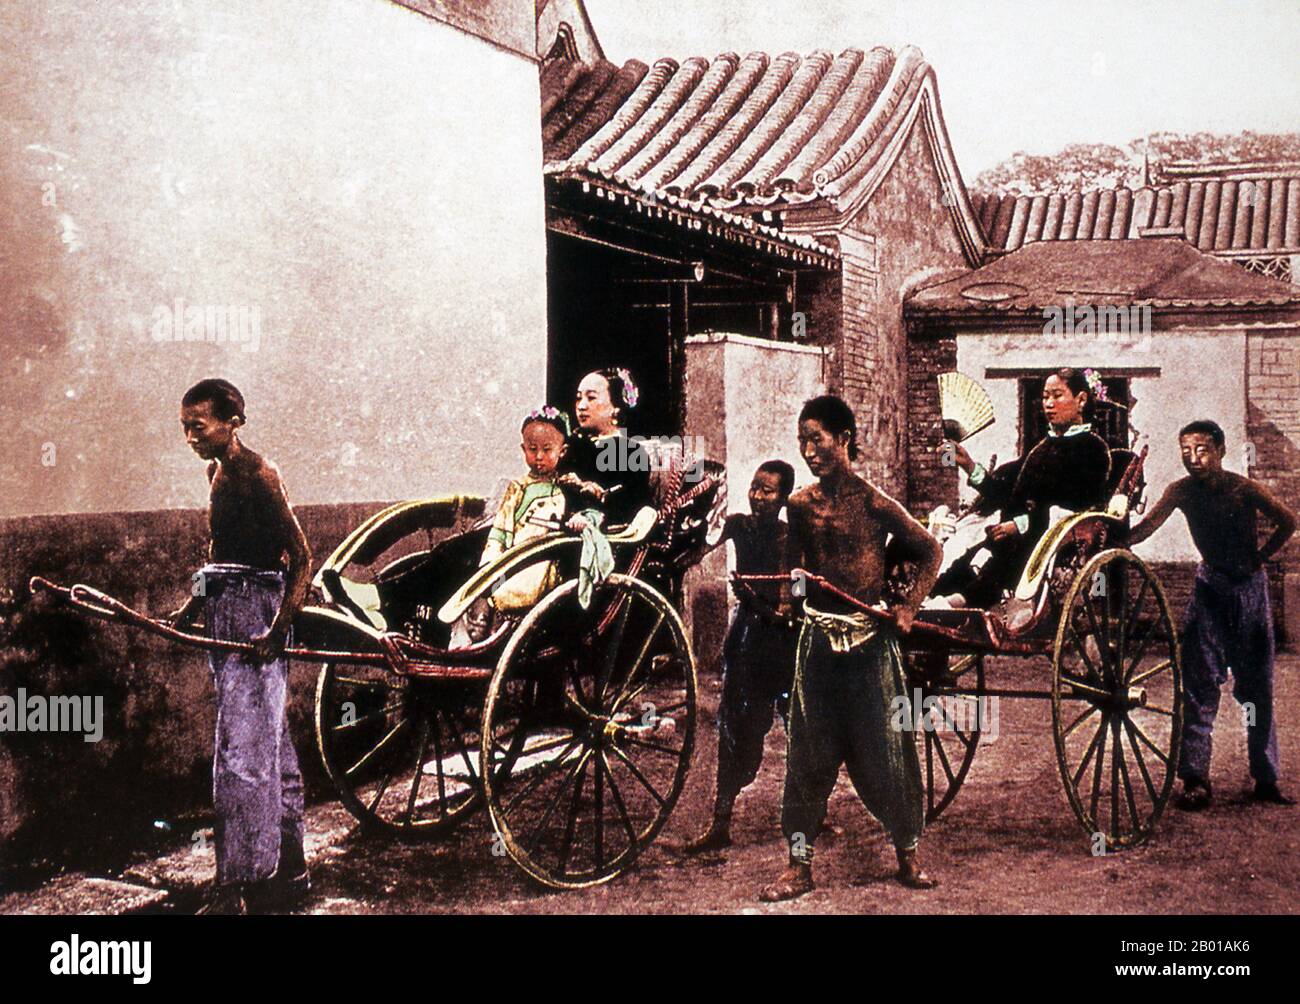 China: Two affluent Chinese women, one with a child, being pulled in rickshaws, Beijing, c. 1890.  Rickshaws (or rickshas) are a mode of human-powered transport: a runner draws a two-wheeled cart which seats one or two persons. Rickshaws are commonly made with bamboo. The word rickshaw came from Asia, where they were mainly used as means of transportation for the social elite. In recent times the use of rickshaws has been discouraged or outlawed in many countries due to concern for the welfare of rickshaw workers. Stock Photo